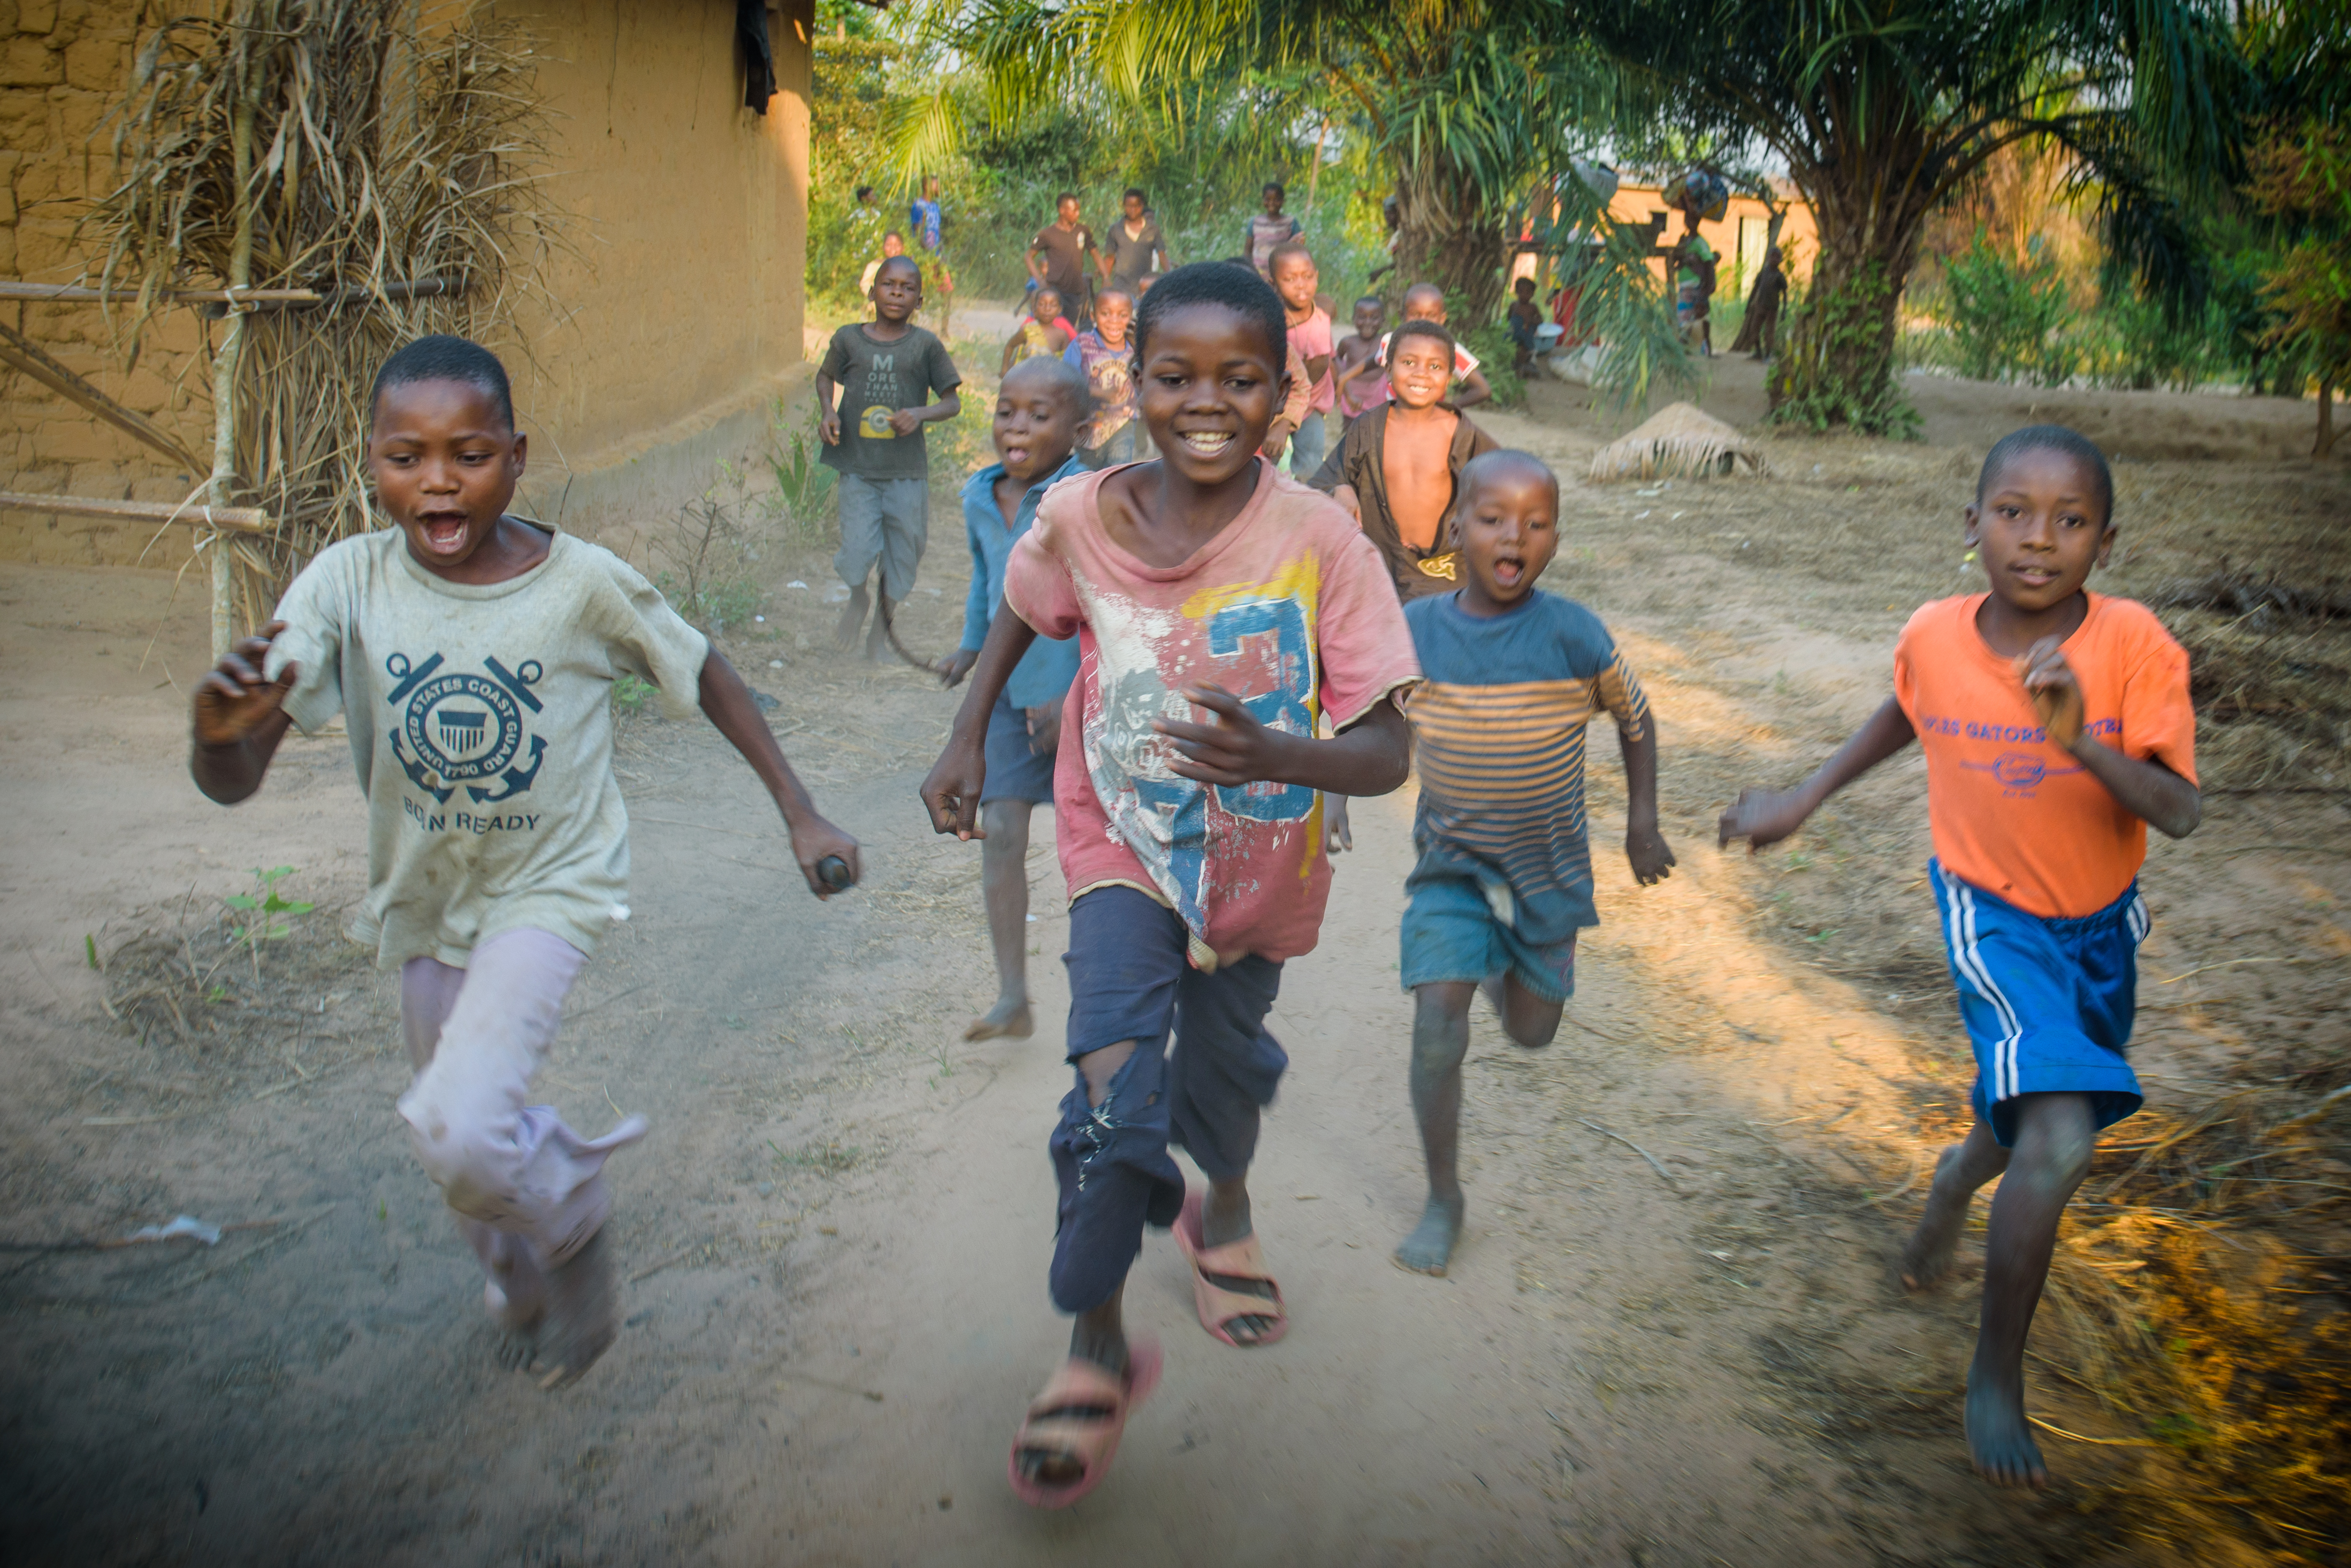 A group of children from the DRC running towards the camera with smiles on their faces